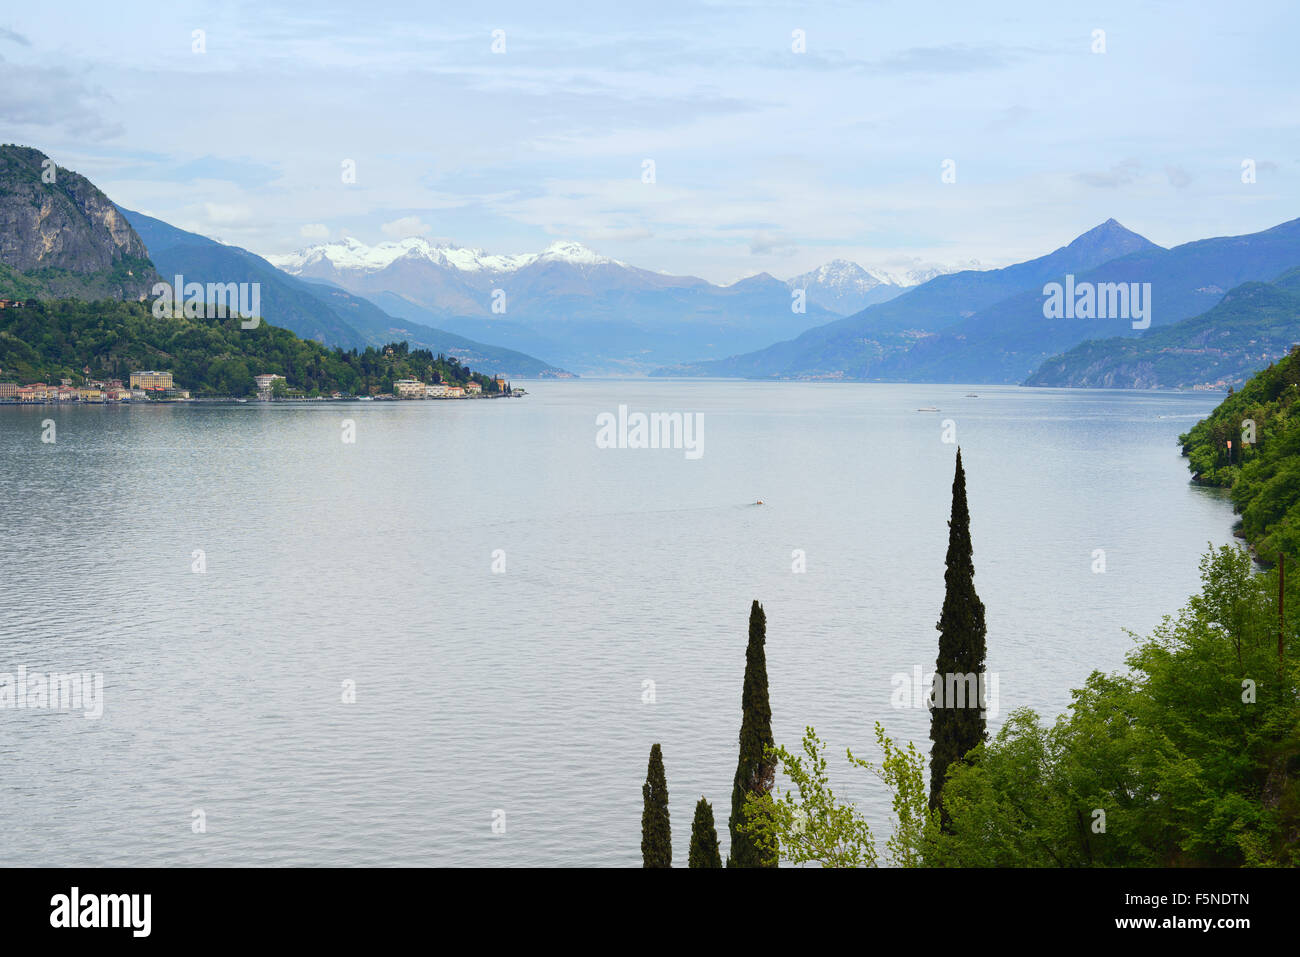 Como Lake landscape. Cypresses Trees, water, a small boat and mountains covered by snow on background. Taken near Bellagio, Ital Stock Photo